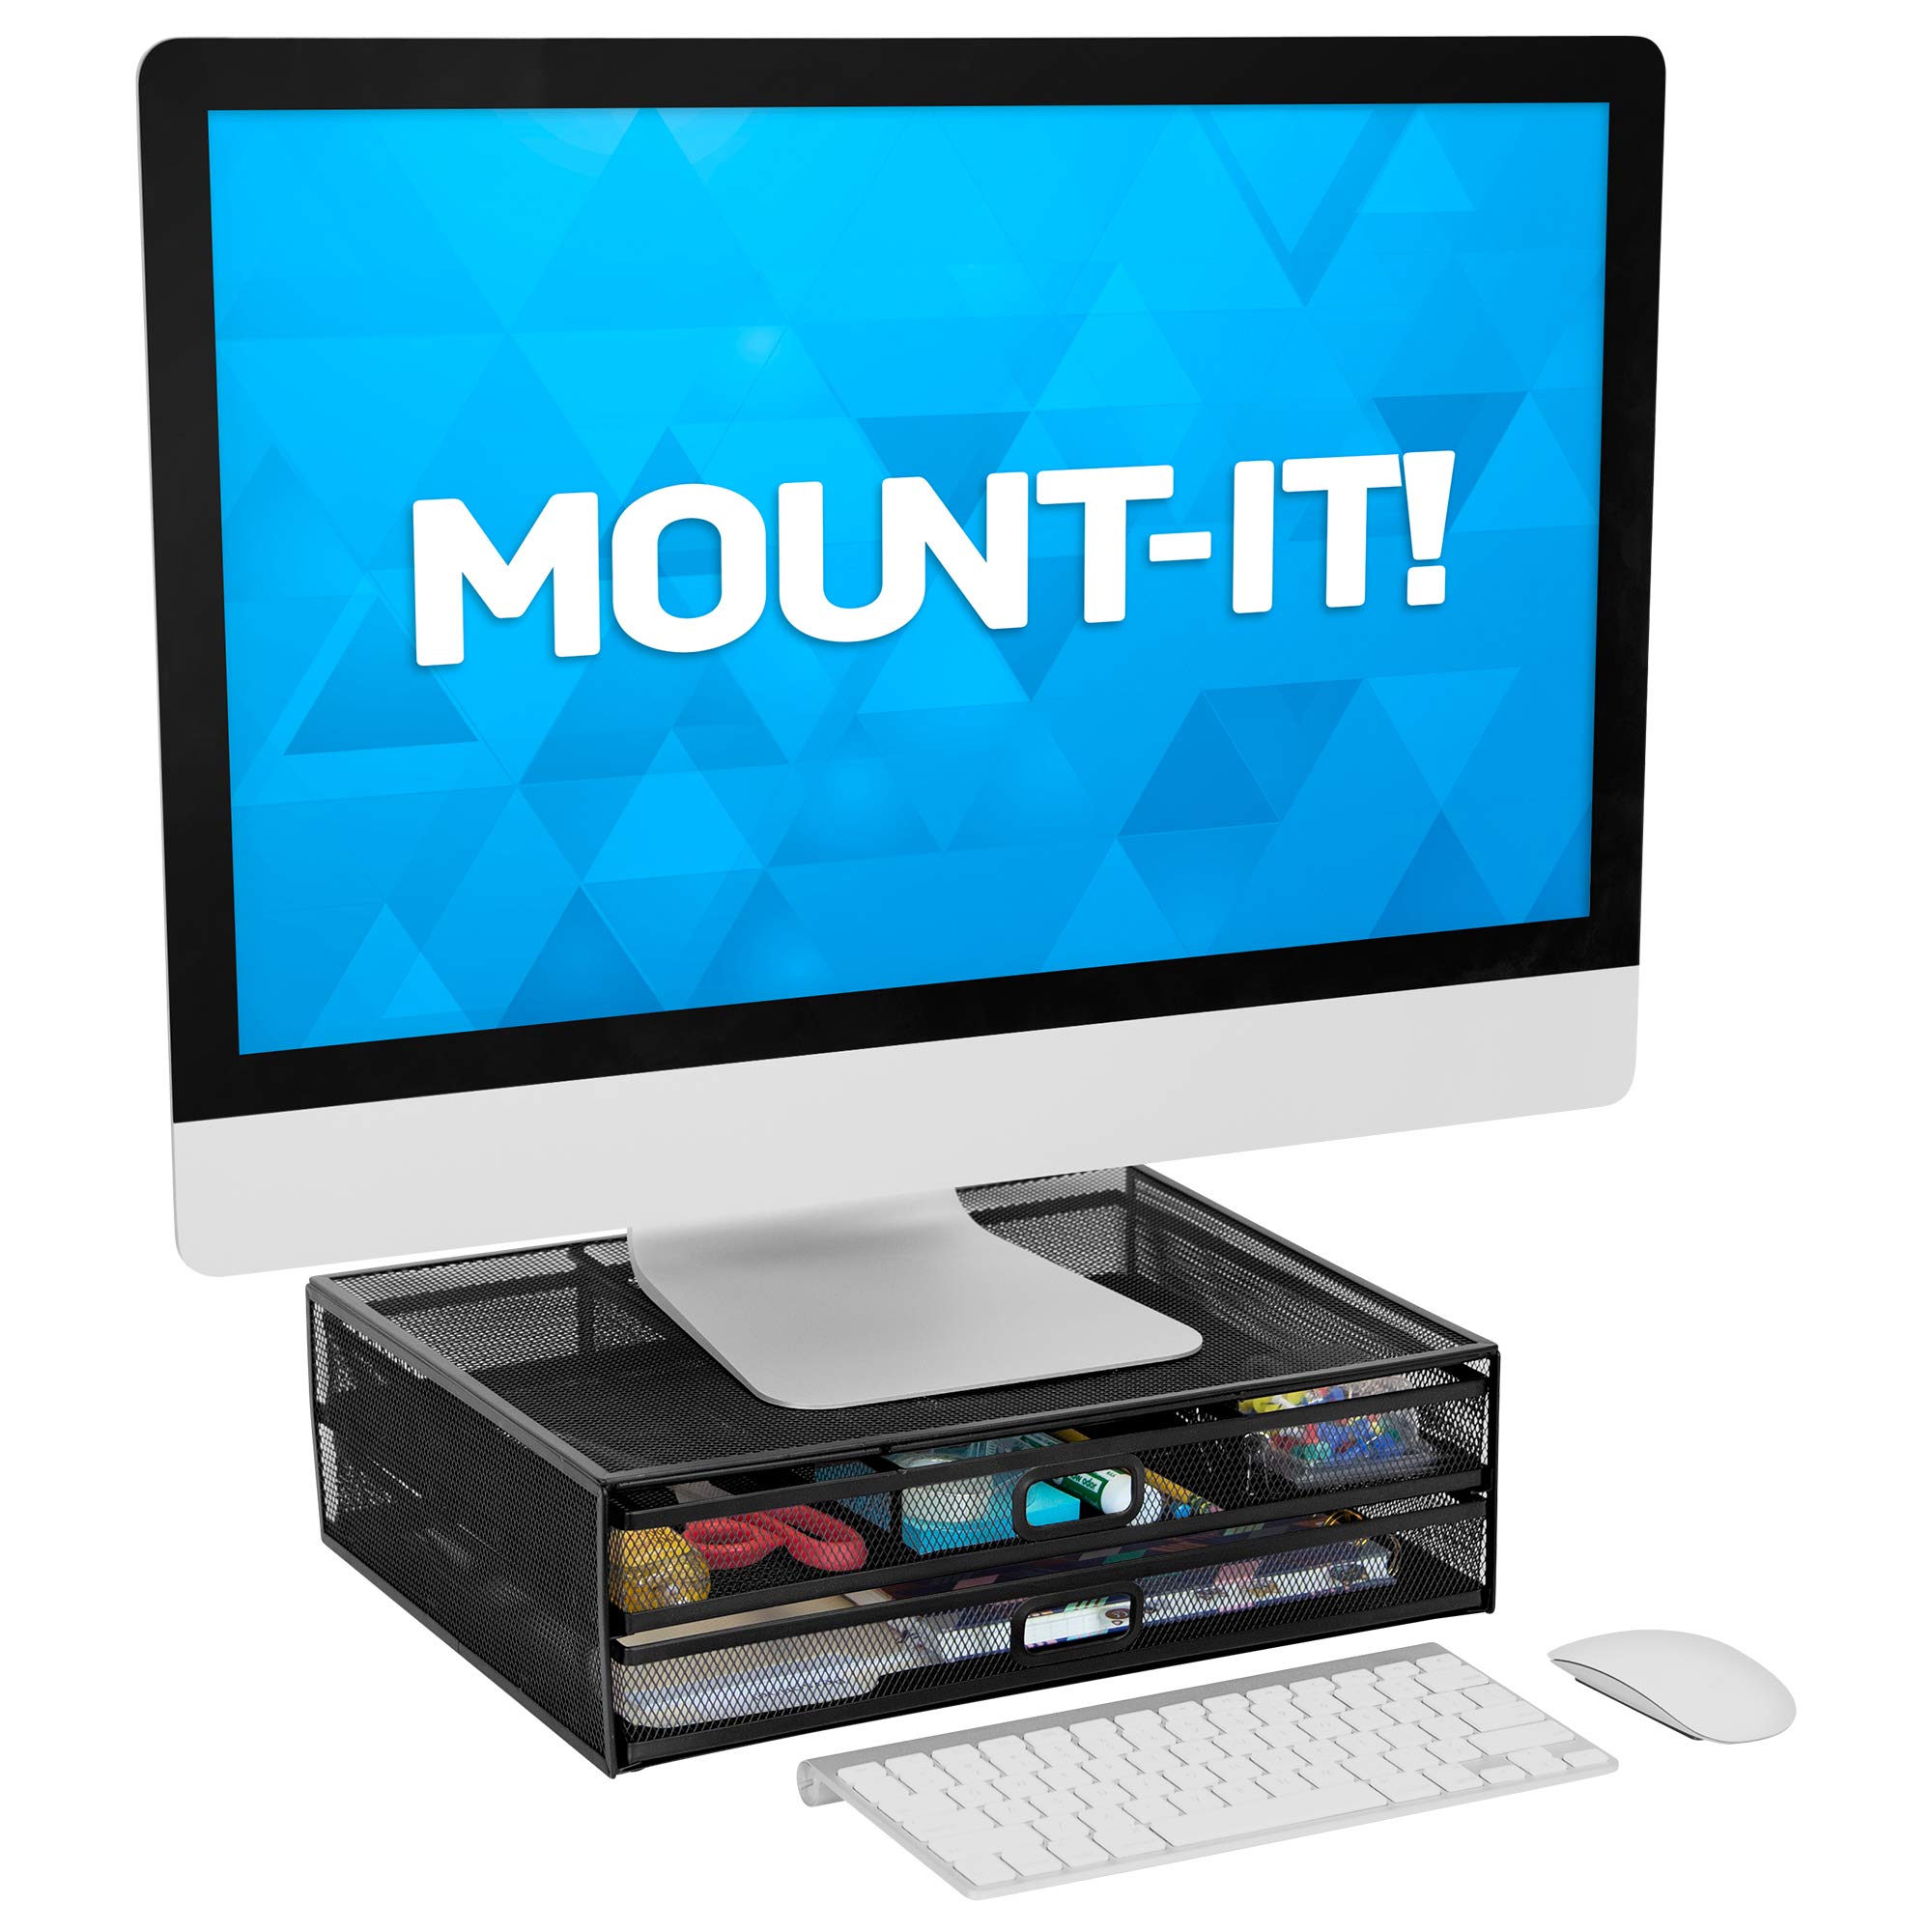 MOUNT-IT! Computer Monitor Stand With Drawers, Metal Mesh Riser and Organizer for Laptops and Computer Screens, Desk Organizer with Two Pullout Storage Drawers, Ideal for Desktop, Laptop, and Printer Accessories and Office Supplies (Black)